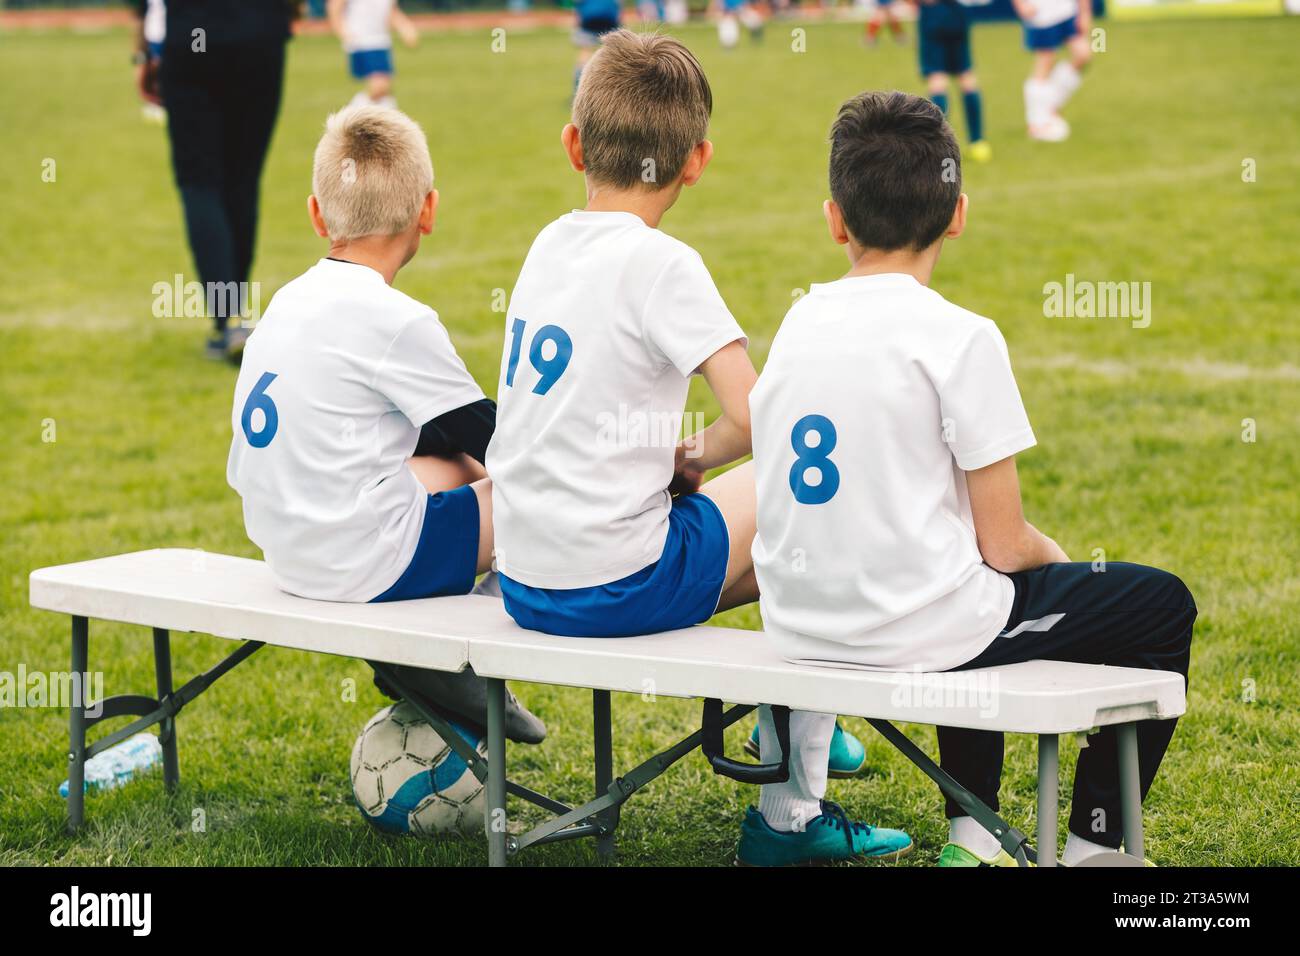 Substitute soccer players in kids' soccer teams. Boys watching football league match from soccer bench. School sports teams on children soccer league Stock Photo